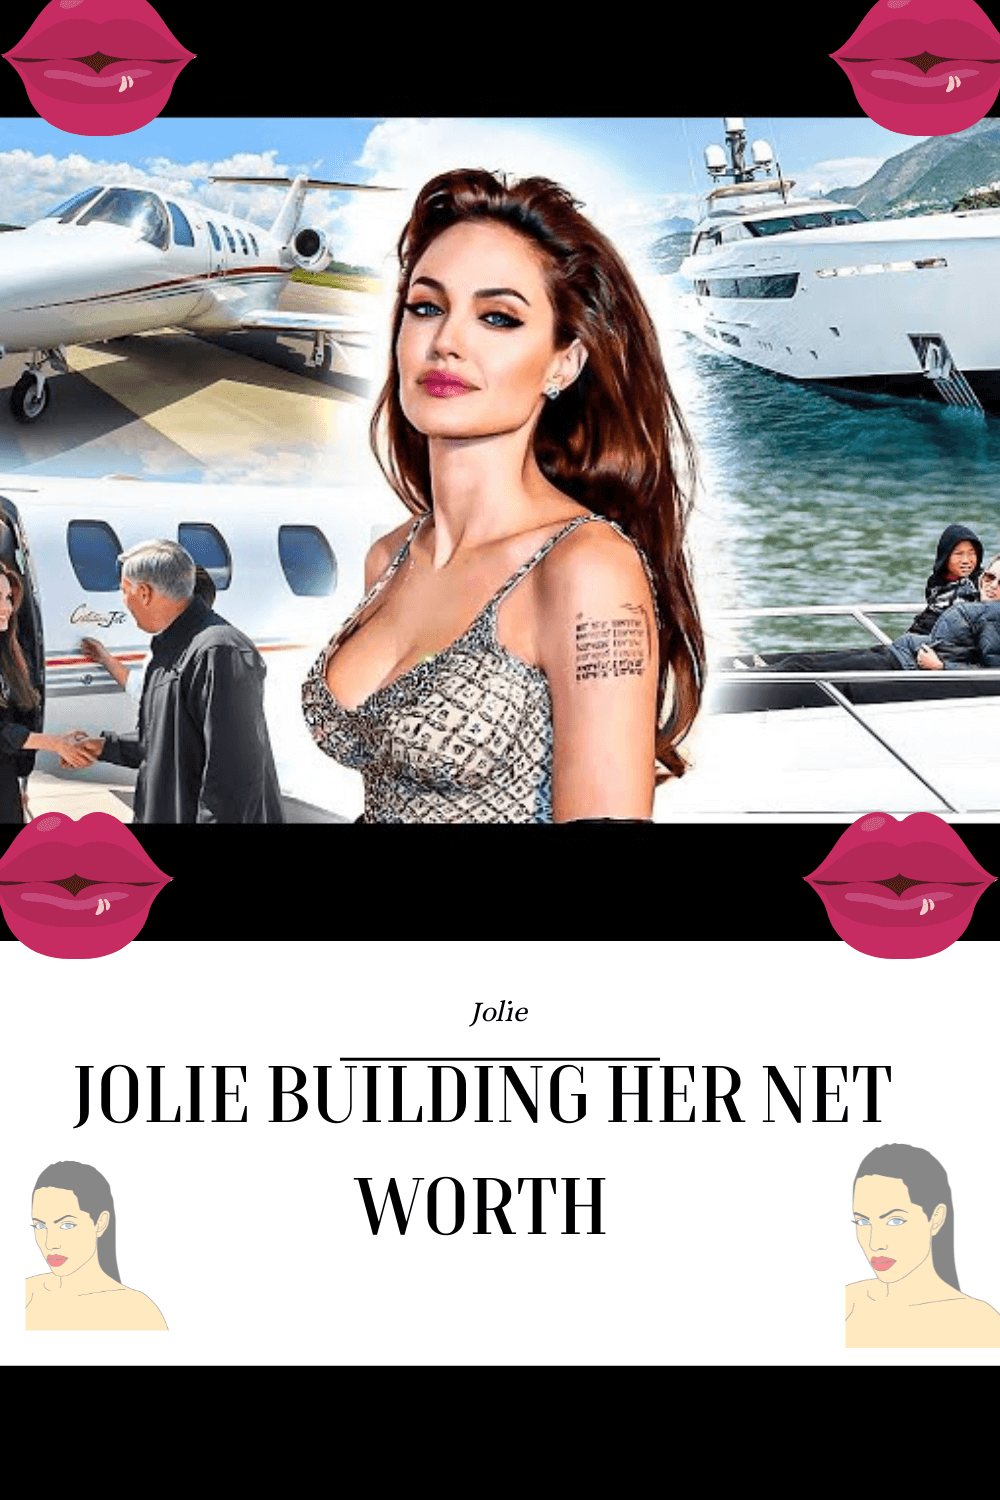 Jolie building her networth showing offf her private Jet, Ski boat, and luxurious items